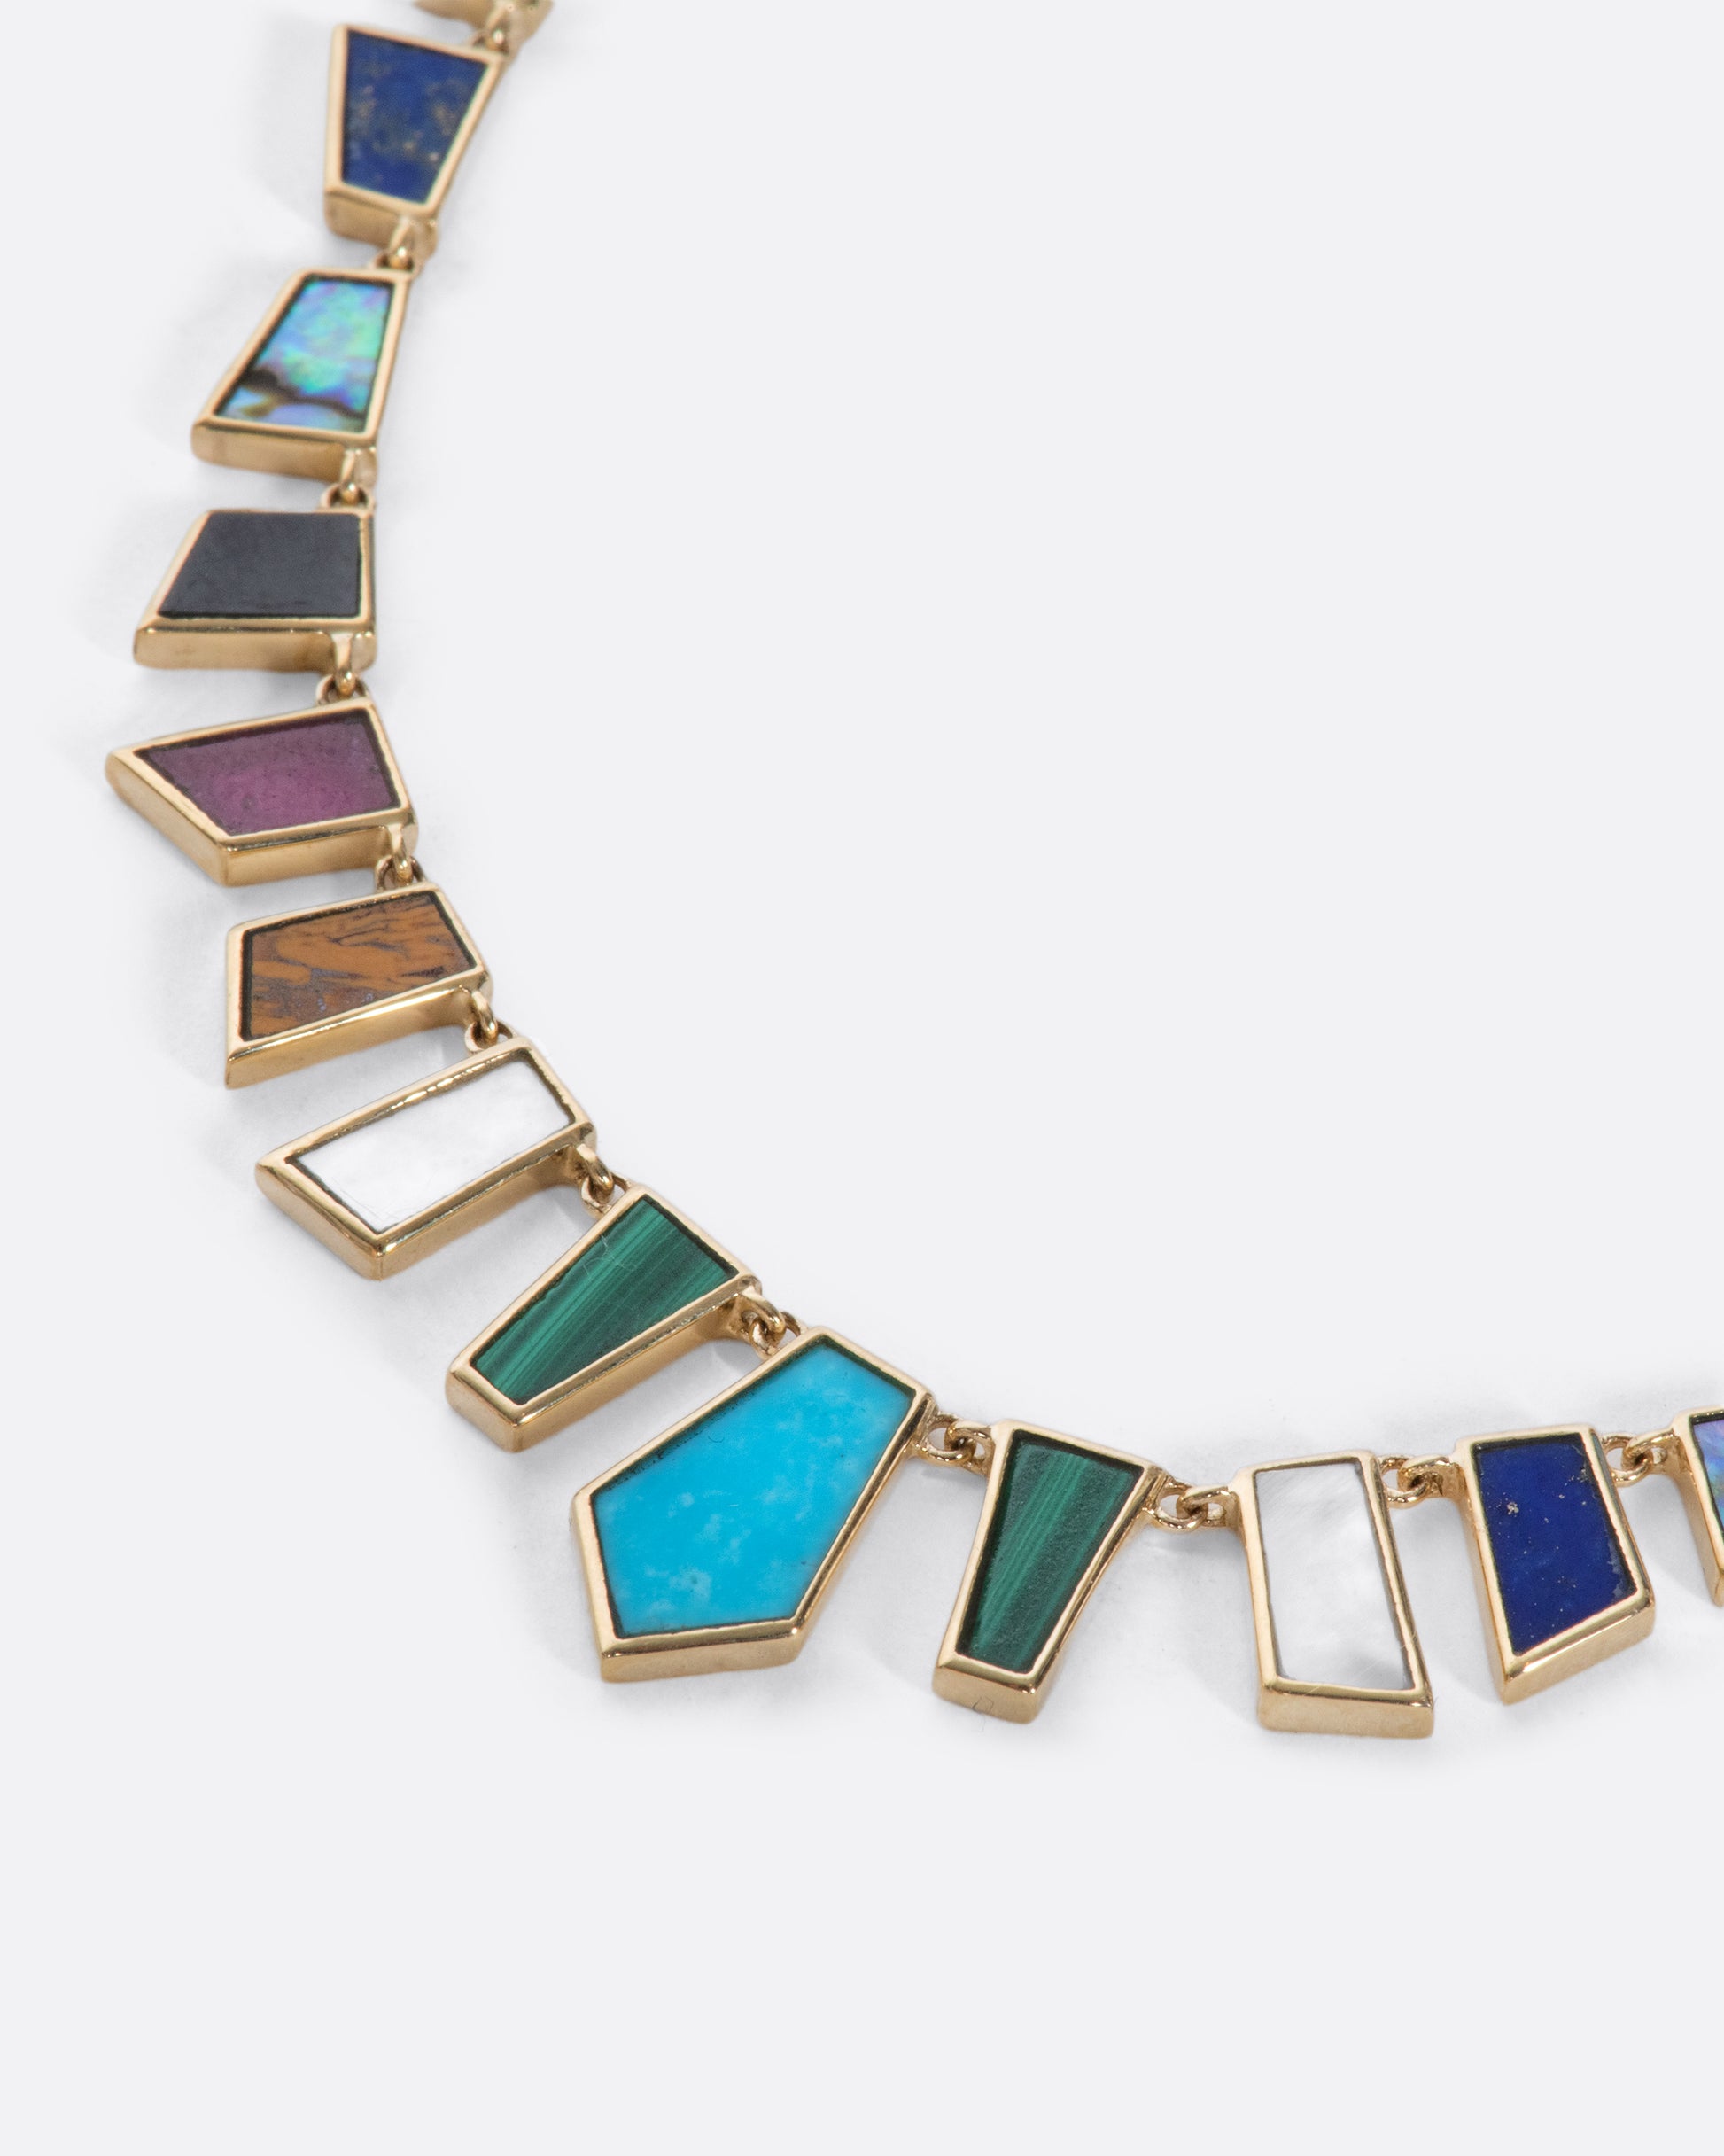 An exceptional array of geometric, hand-cut stones intricately laid in 9k gold. Look closely and, you'll notice the stones are symmetrically cut, while each color is different.